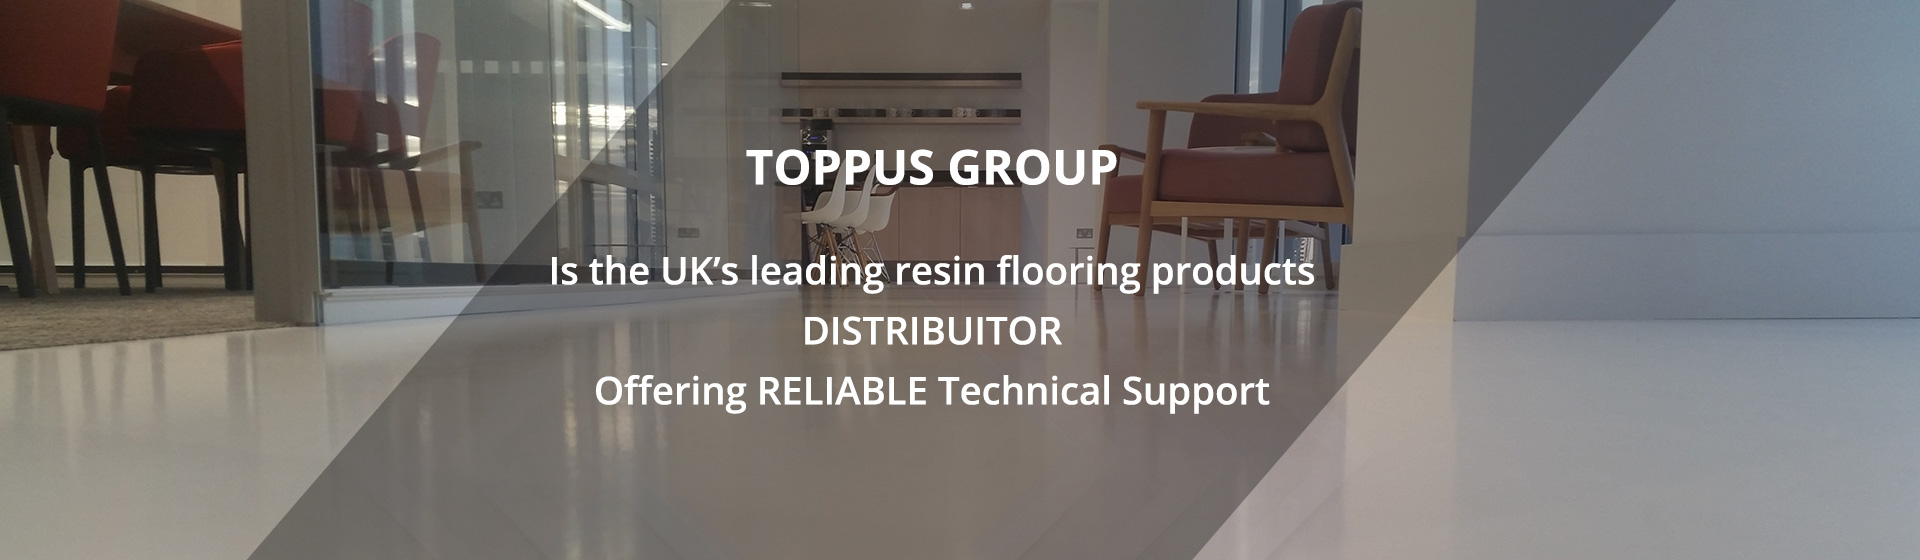 TOPPUS GROUP